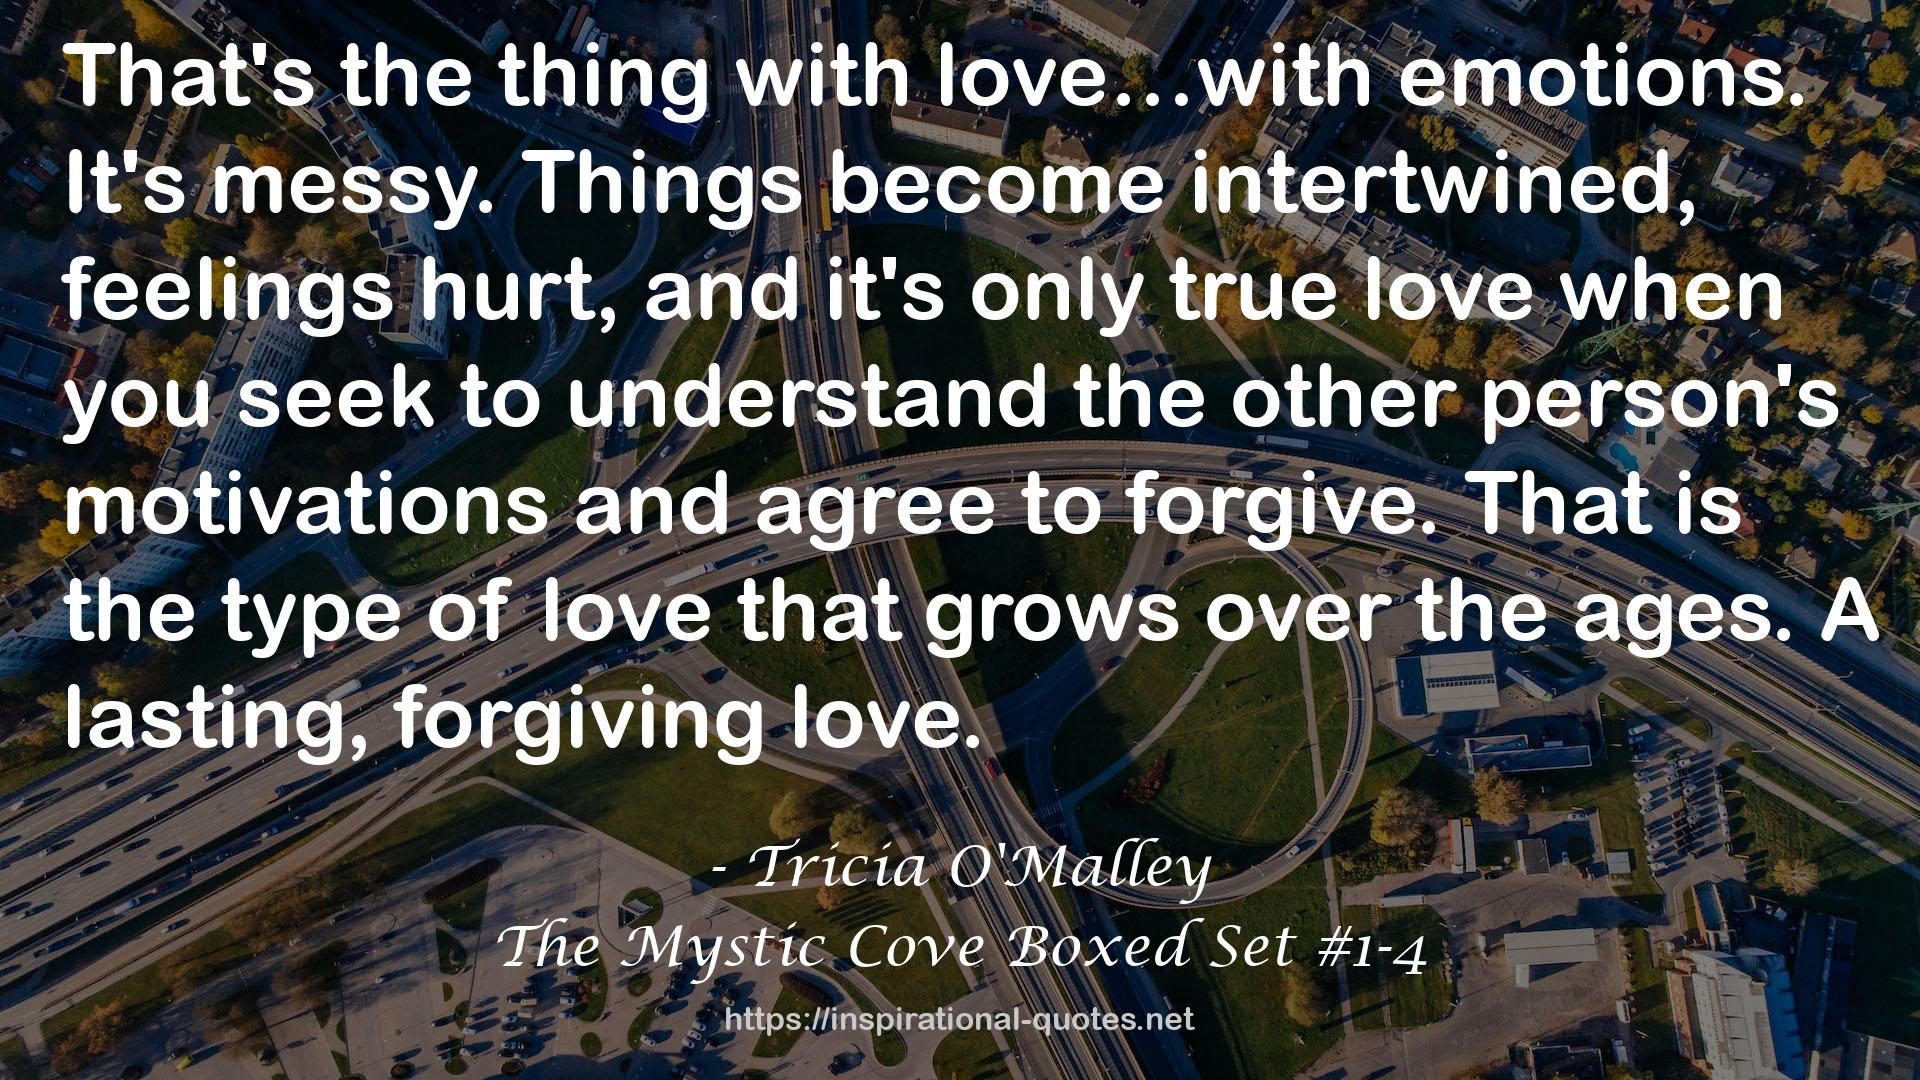 The Mystic Cove Boxed Set #1-4 QUOTES